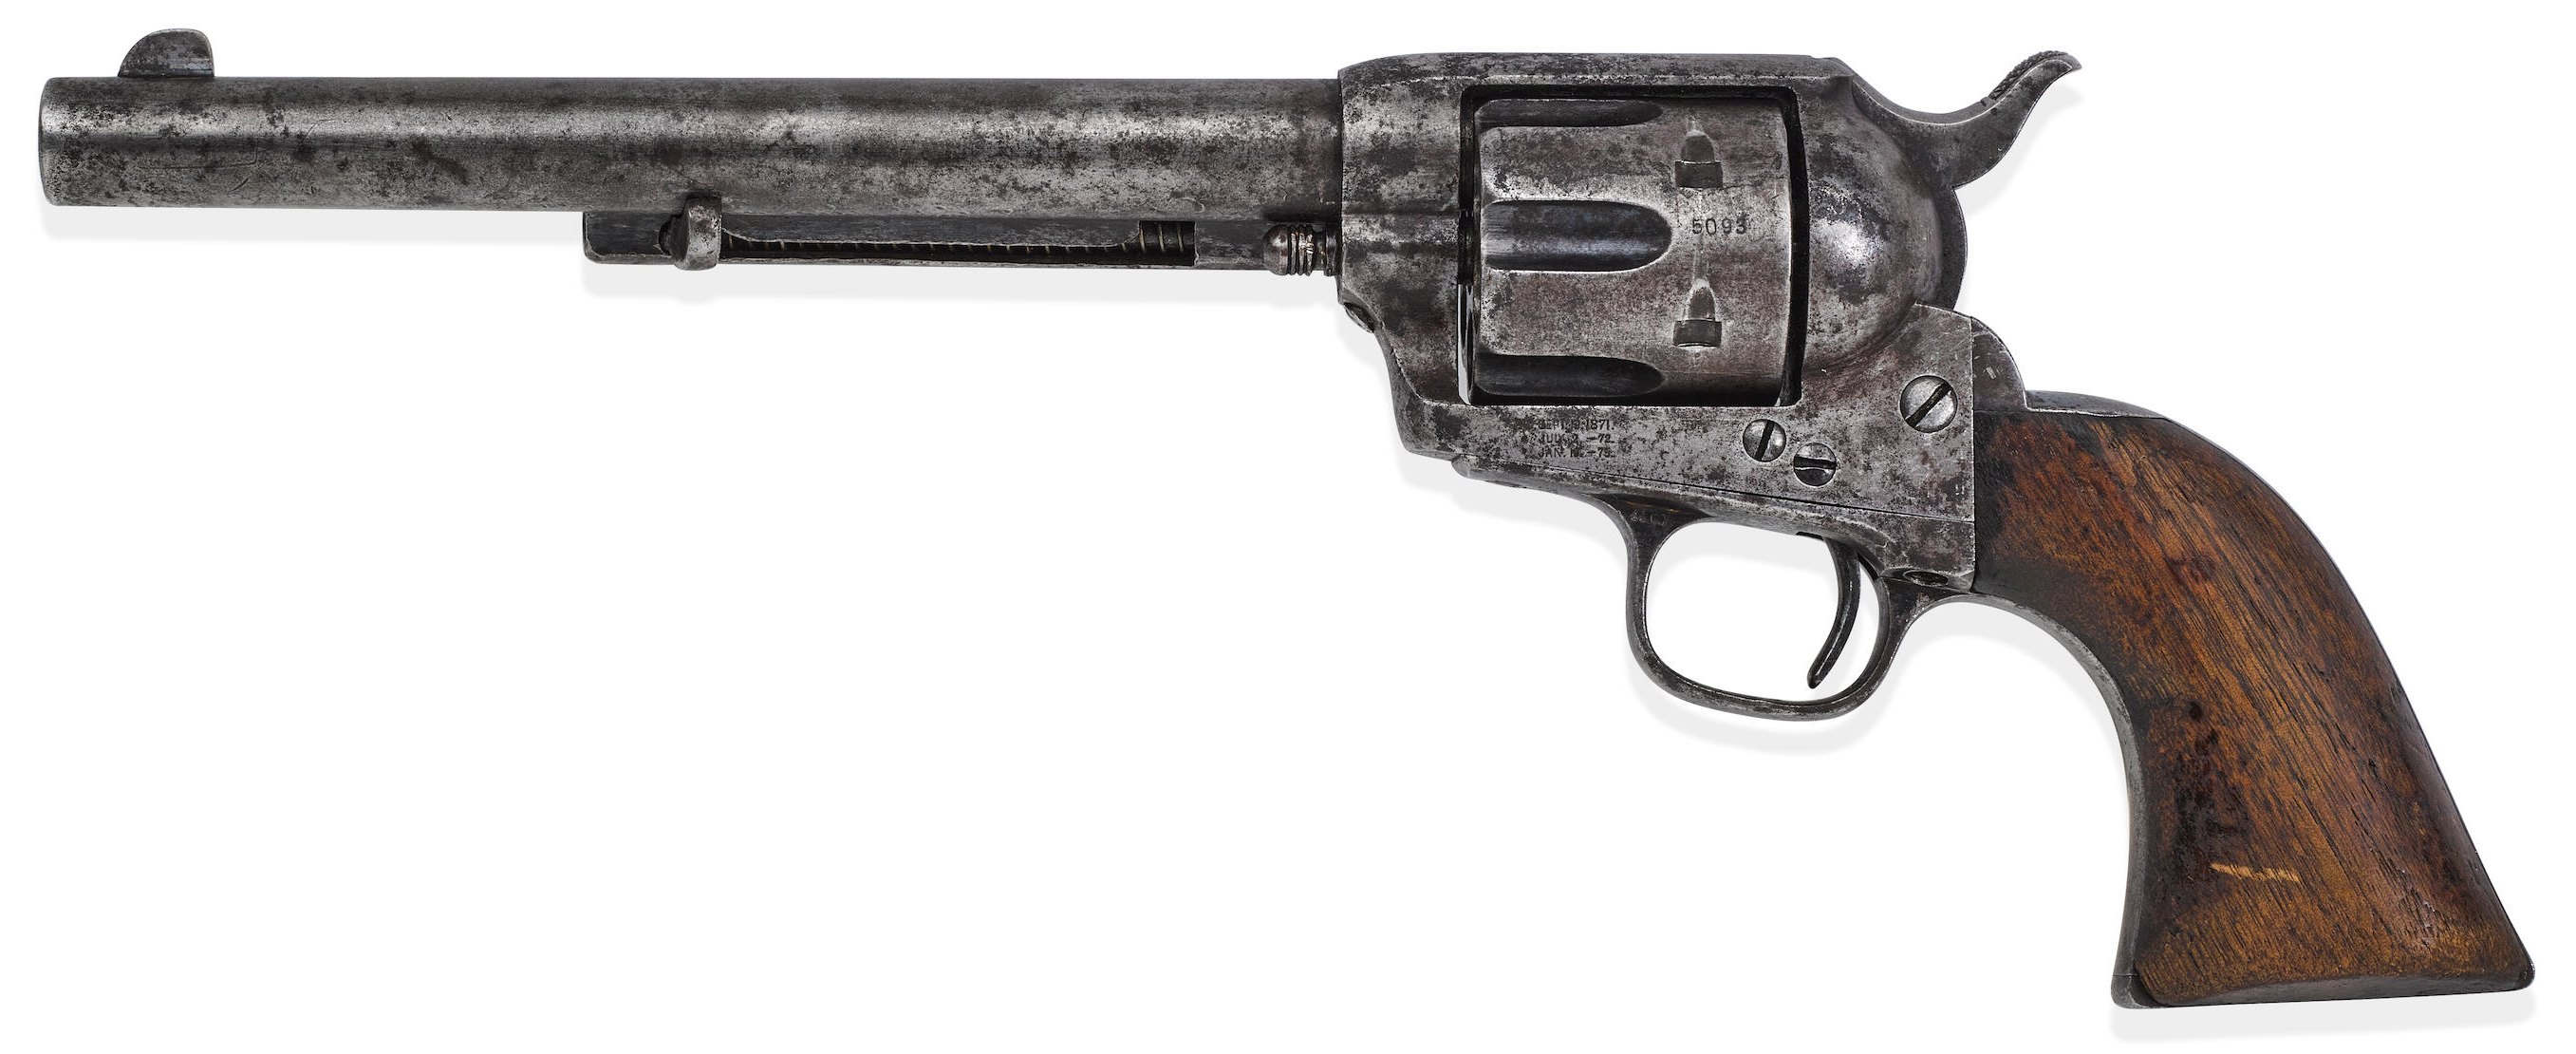 The gun that killed Billy the Kid was sold for an absurdly record amount